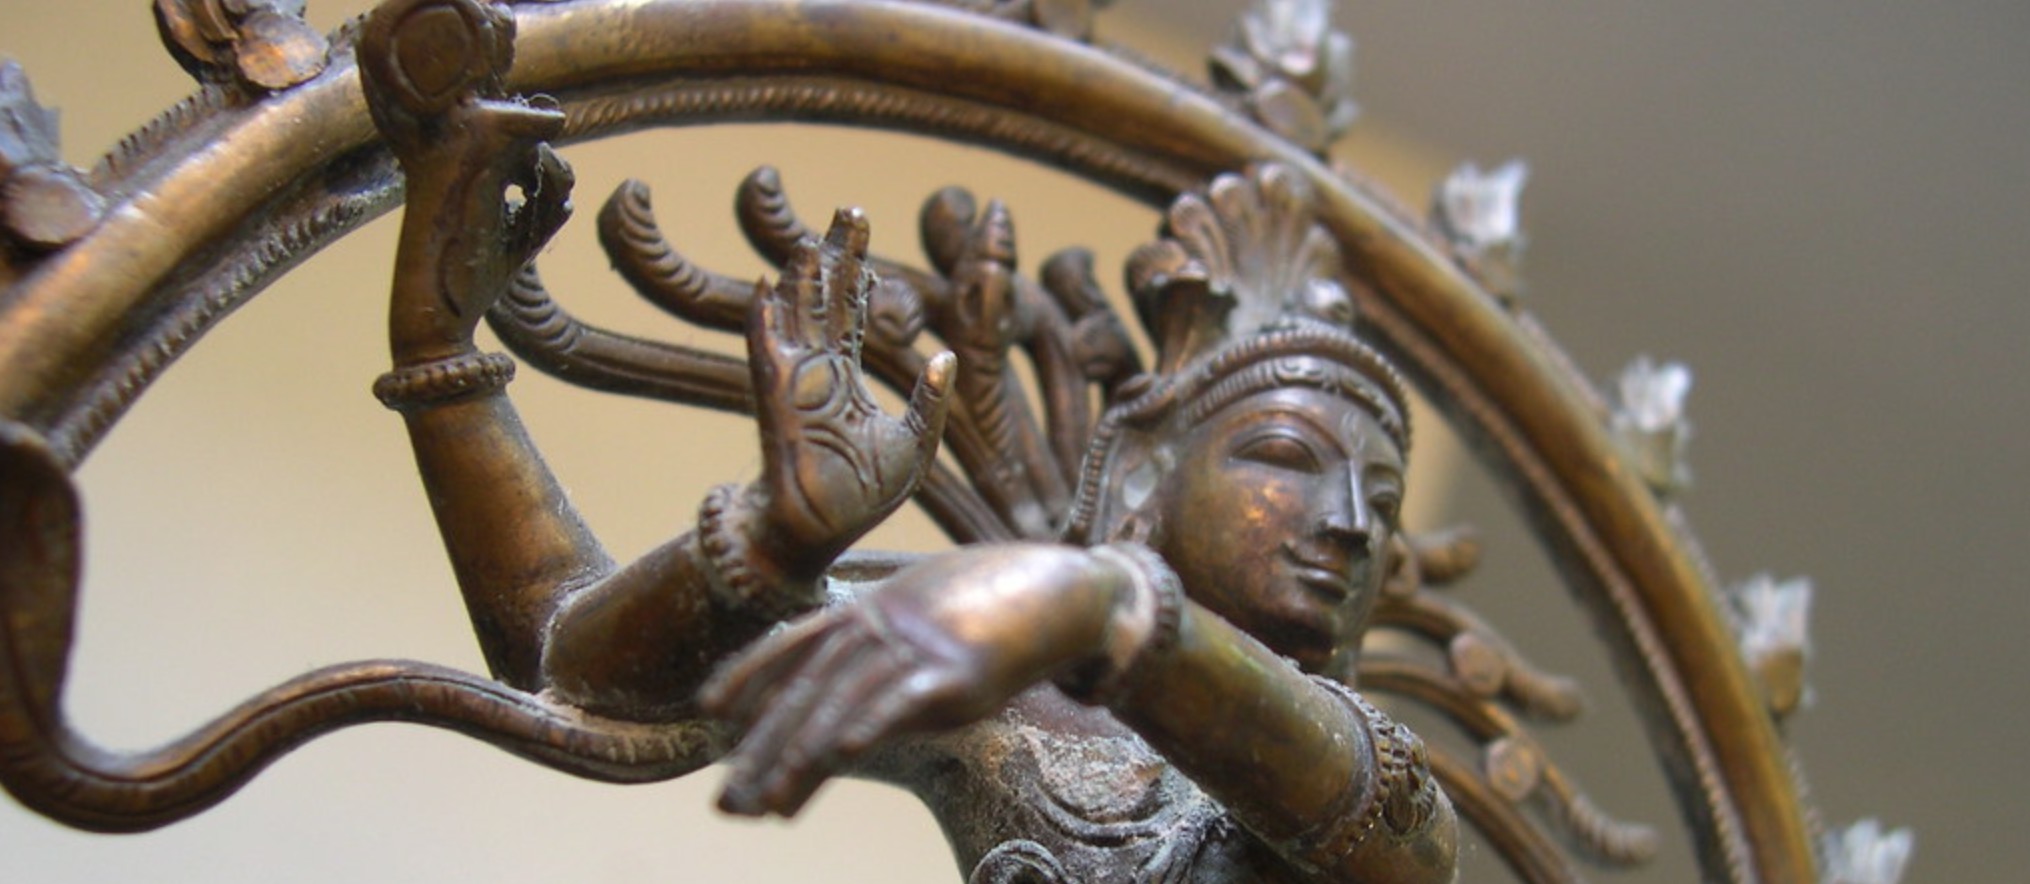 What is the story of the Nataraj form of Shiva? - Quora